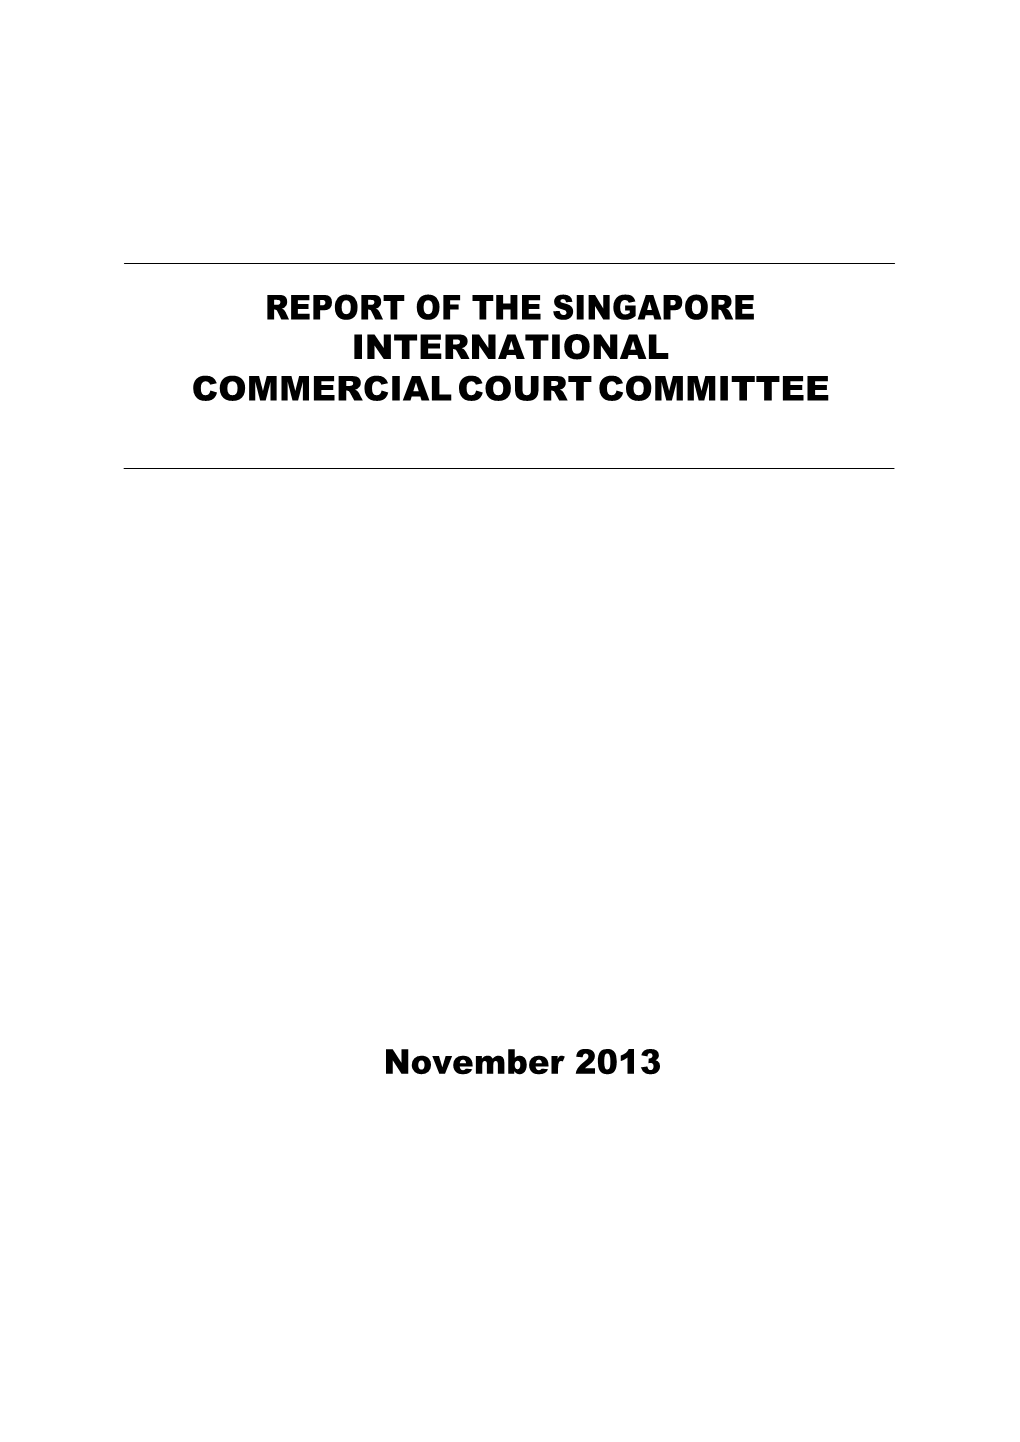 Report of the Singapore International Commercial Court Committee